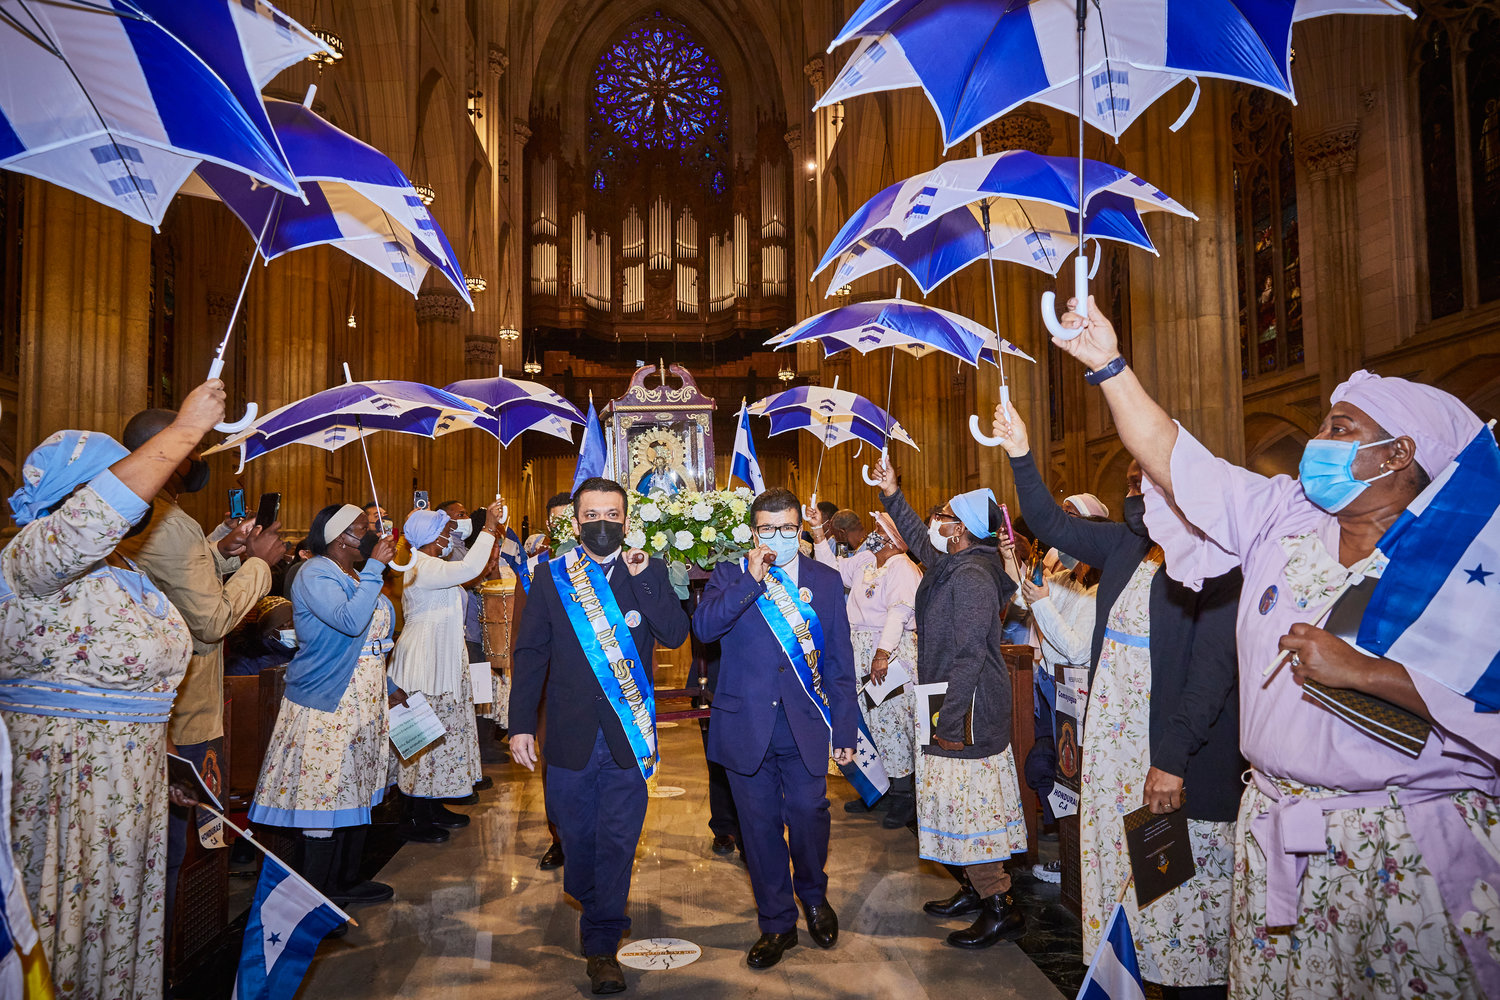 An image of Our Lady of Suyapa was featured in the entrance procession of the annual Mass honoring the patroness of Honduras Feb. 13 at St. Patrick’s Cathedral. The umbrellas held aloft symbolize the presence of the Holy Spirit among the faithful. The principal celebrant and homilist was Bishop Jose Antonio Canales Motiño of the Diocese of Danlí, Honduras.